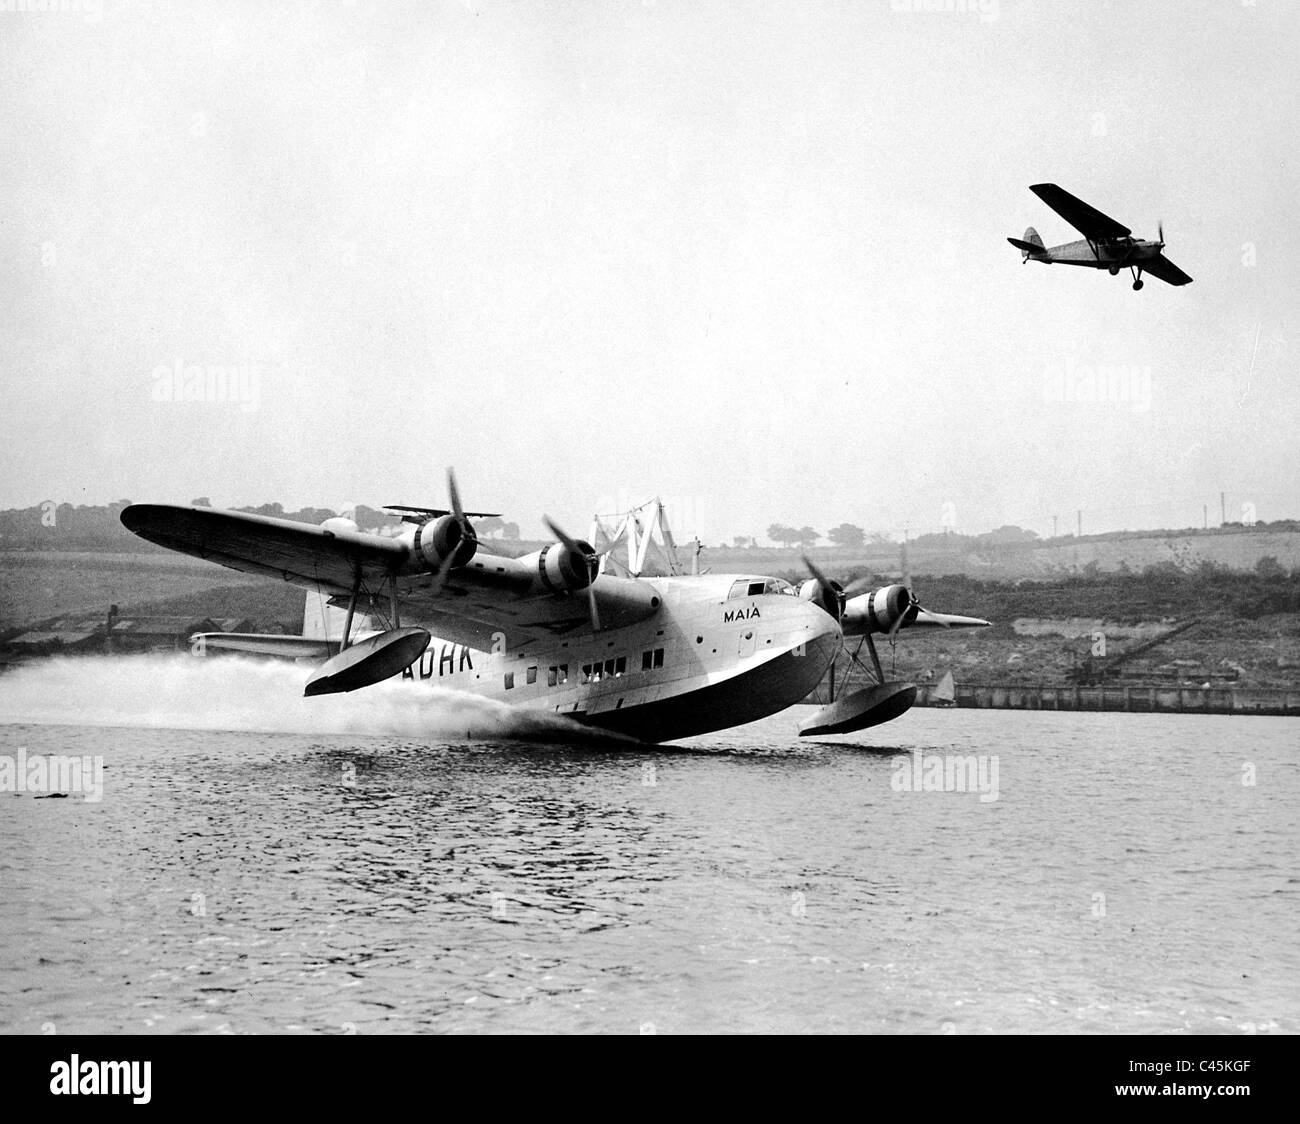 S.20 Short-Mayo seaplane 'Maia', 1937 Banque D'Images